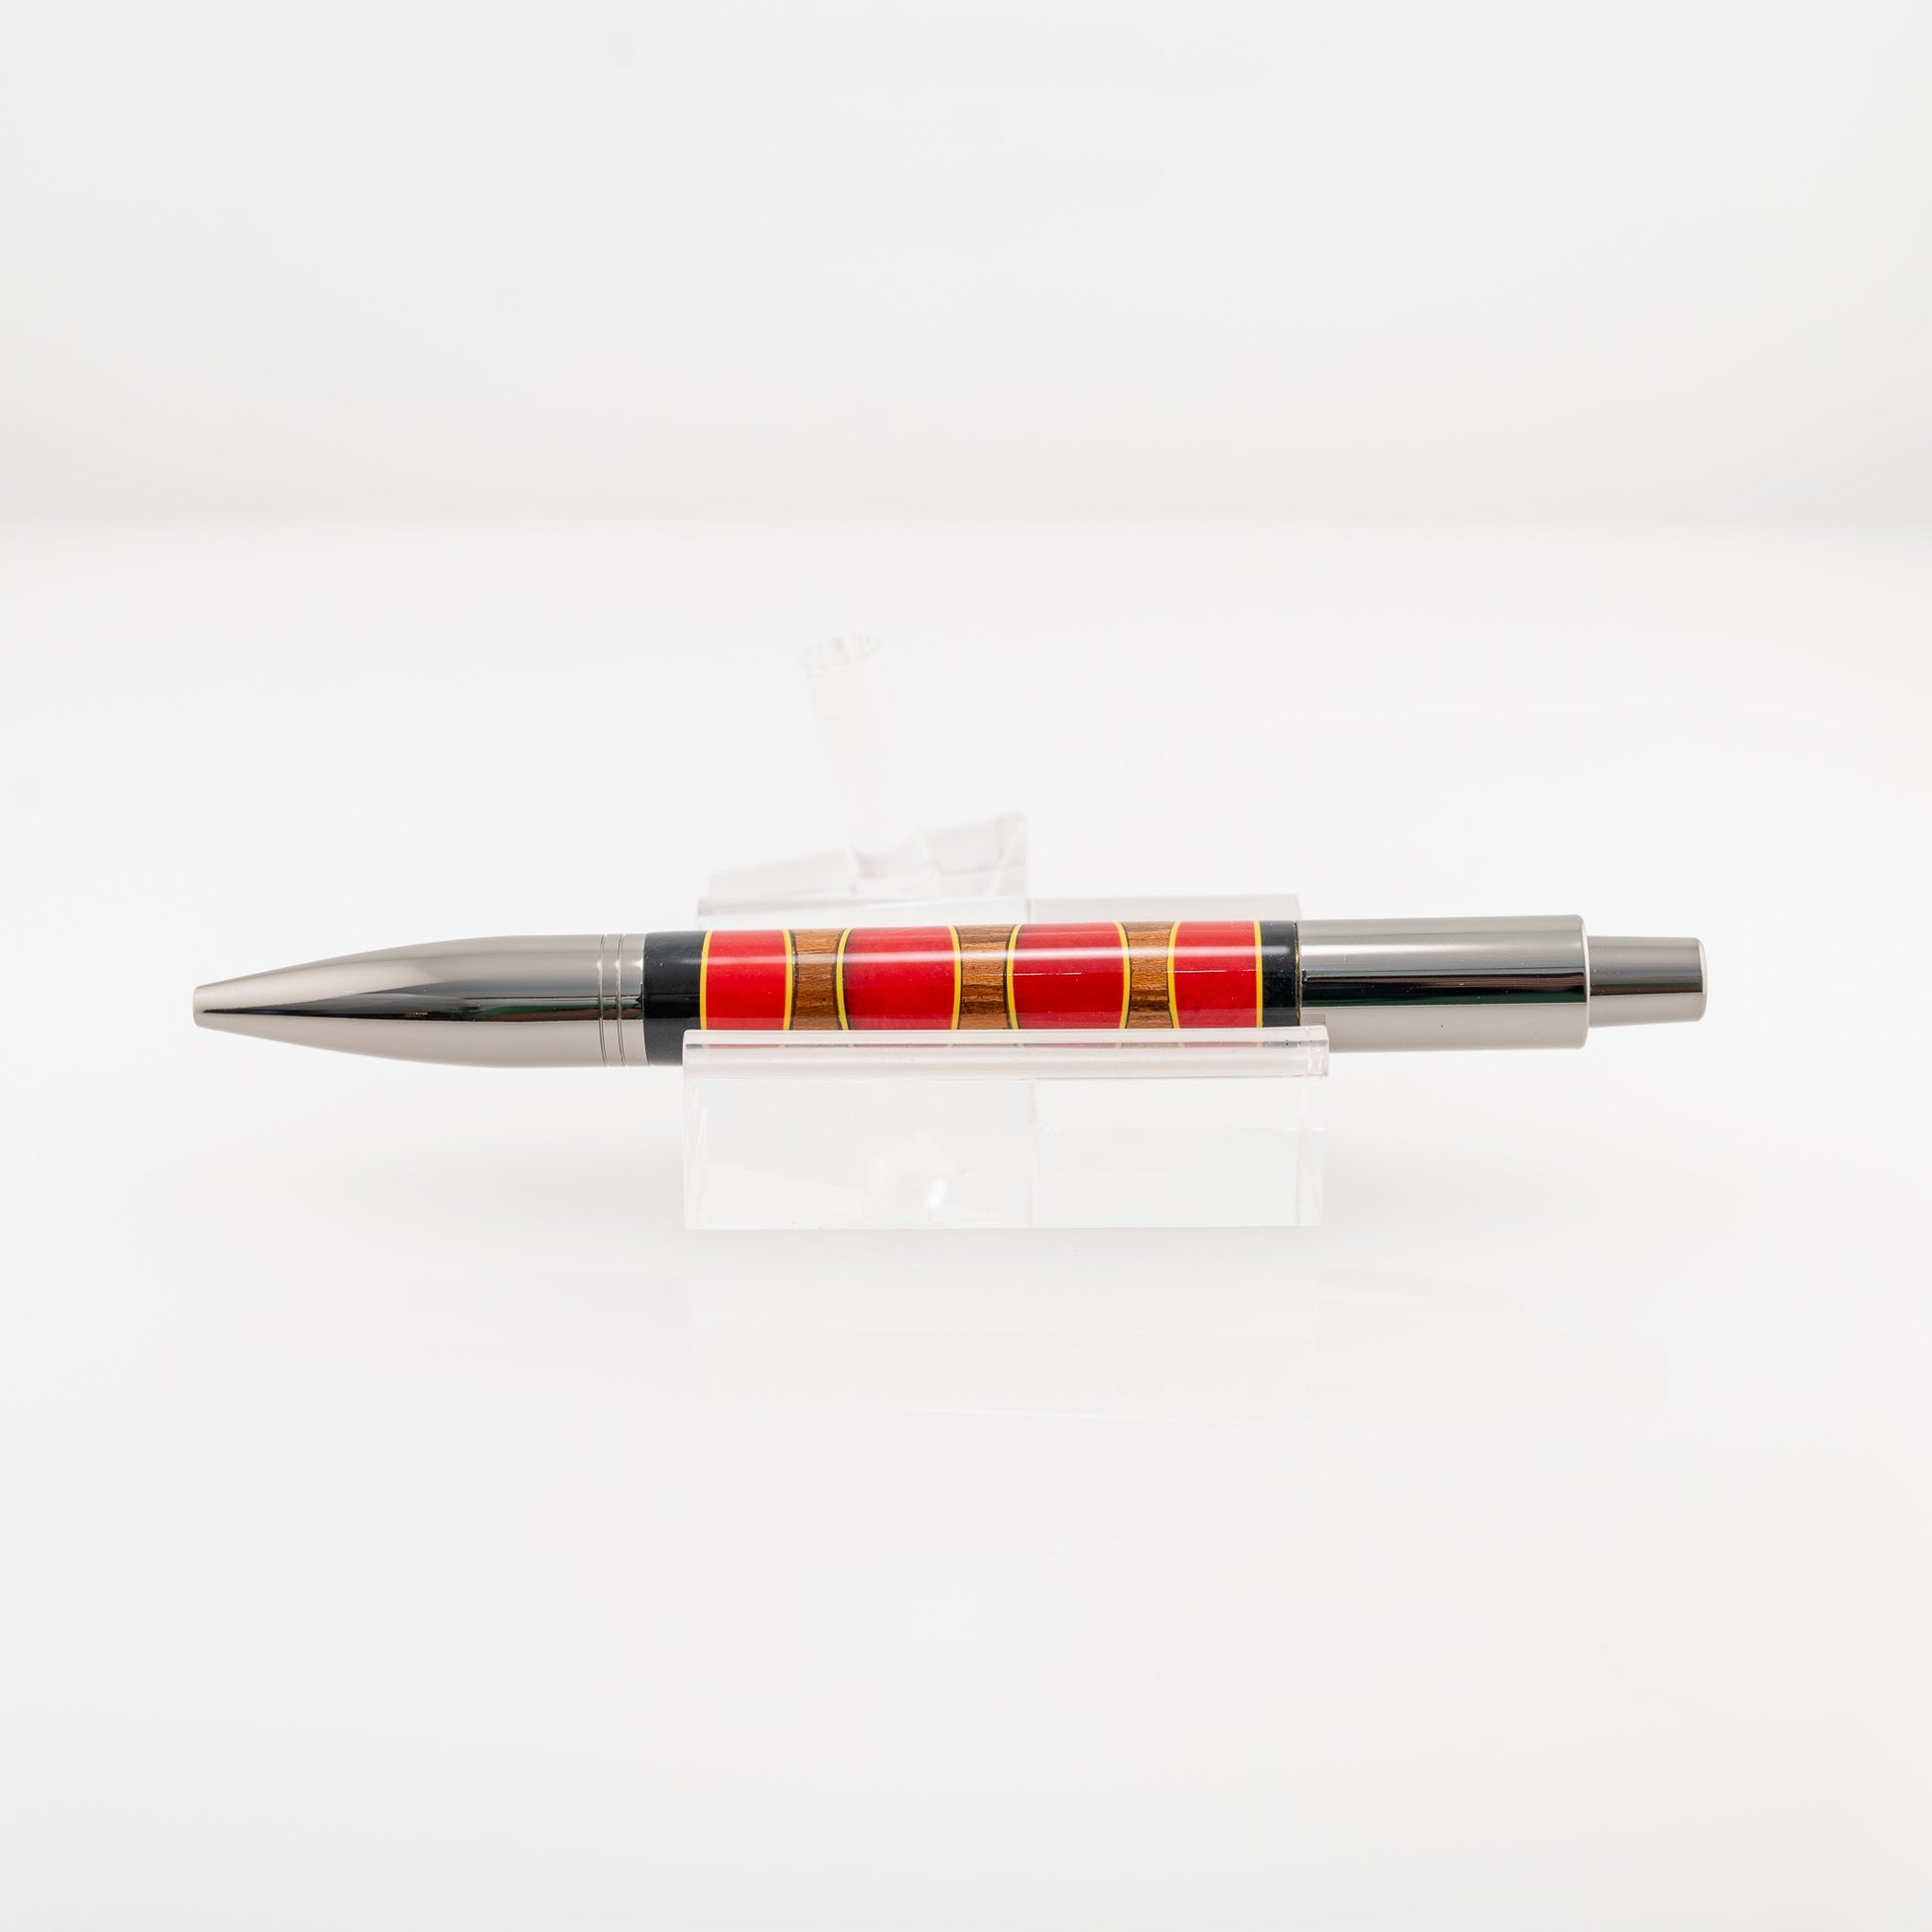 Handmade red and black resin and Canarywood segmented ballpoint click pen on a clear stand.